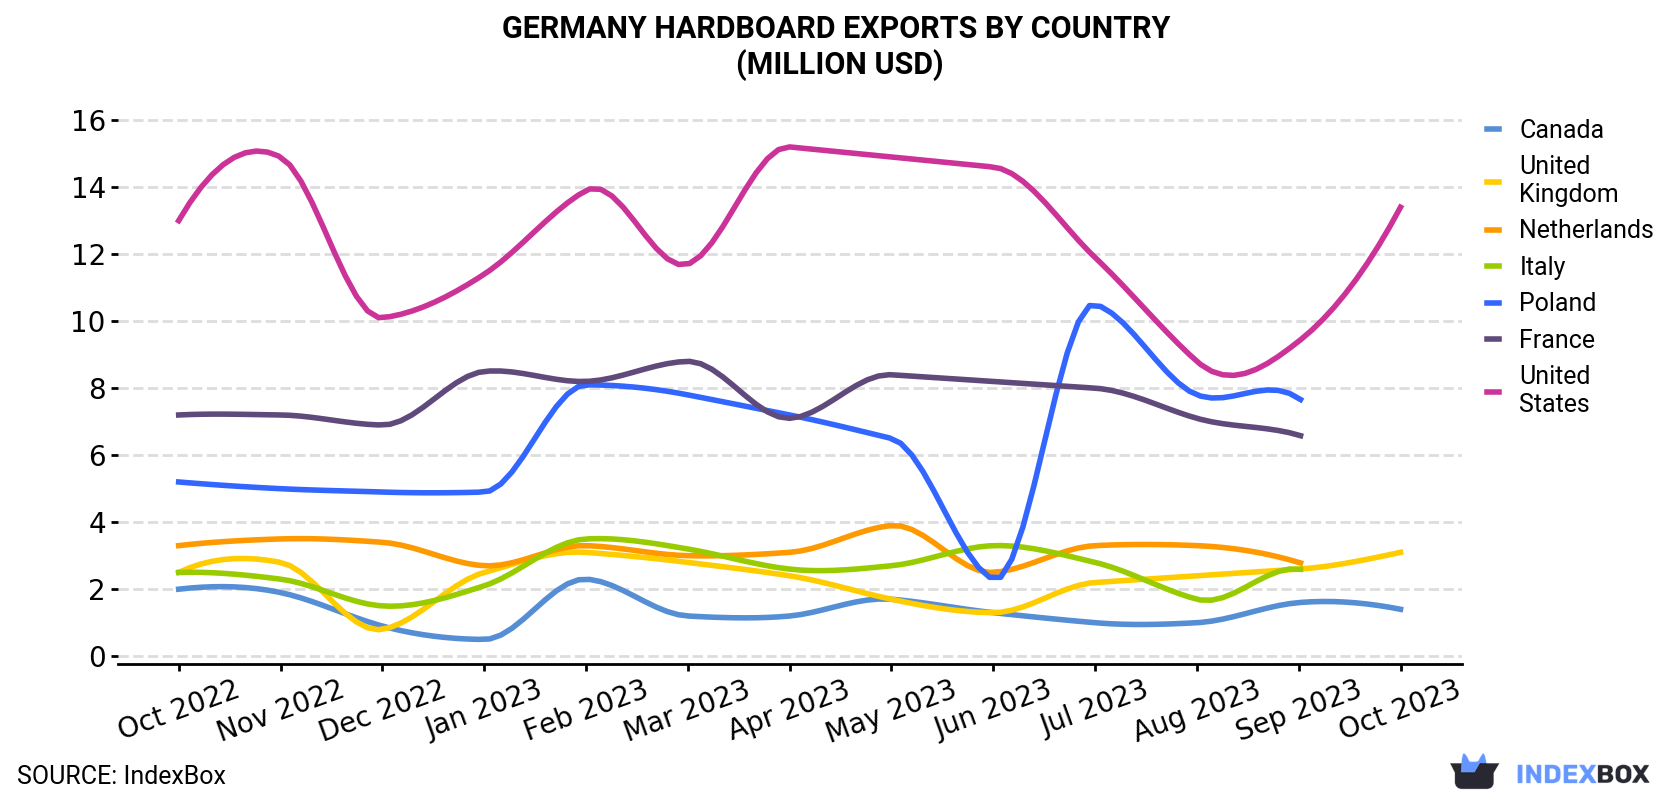 Germany Hardboard Exports By Country (Million USD)